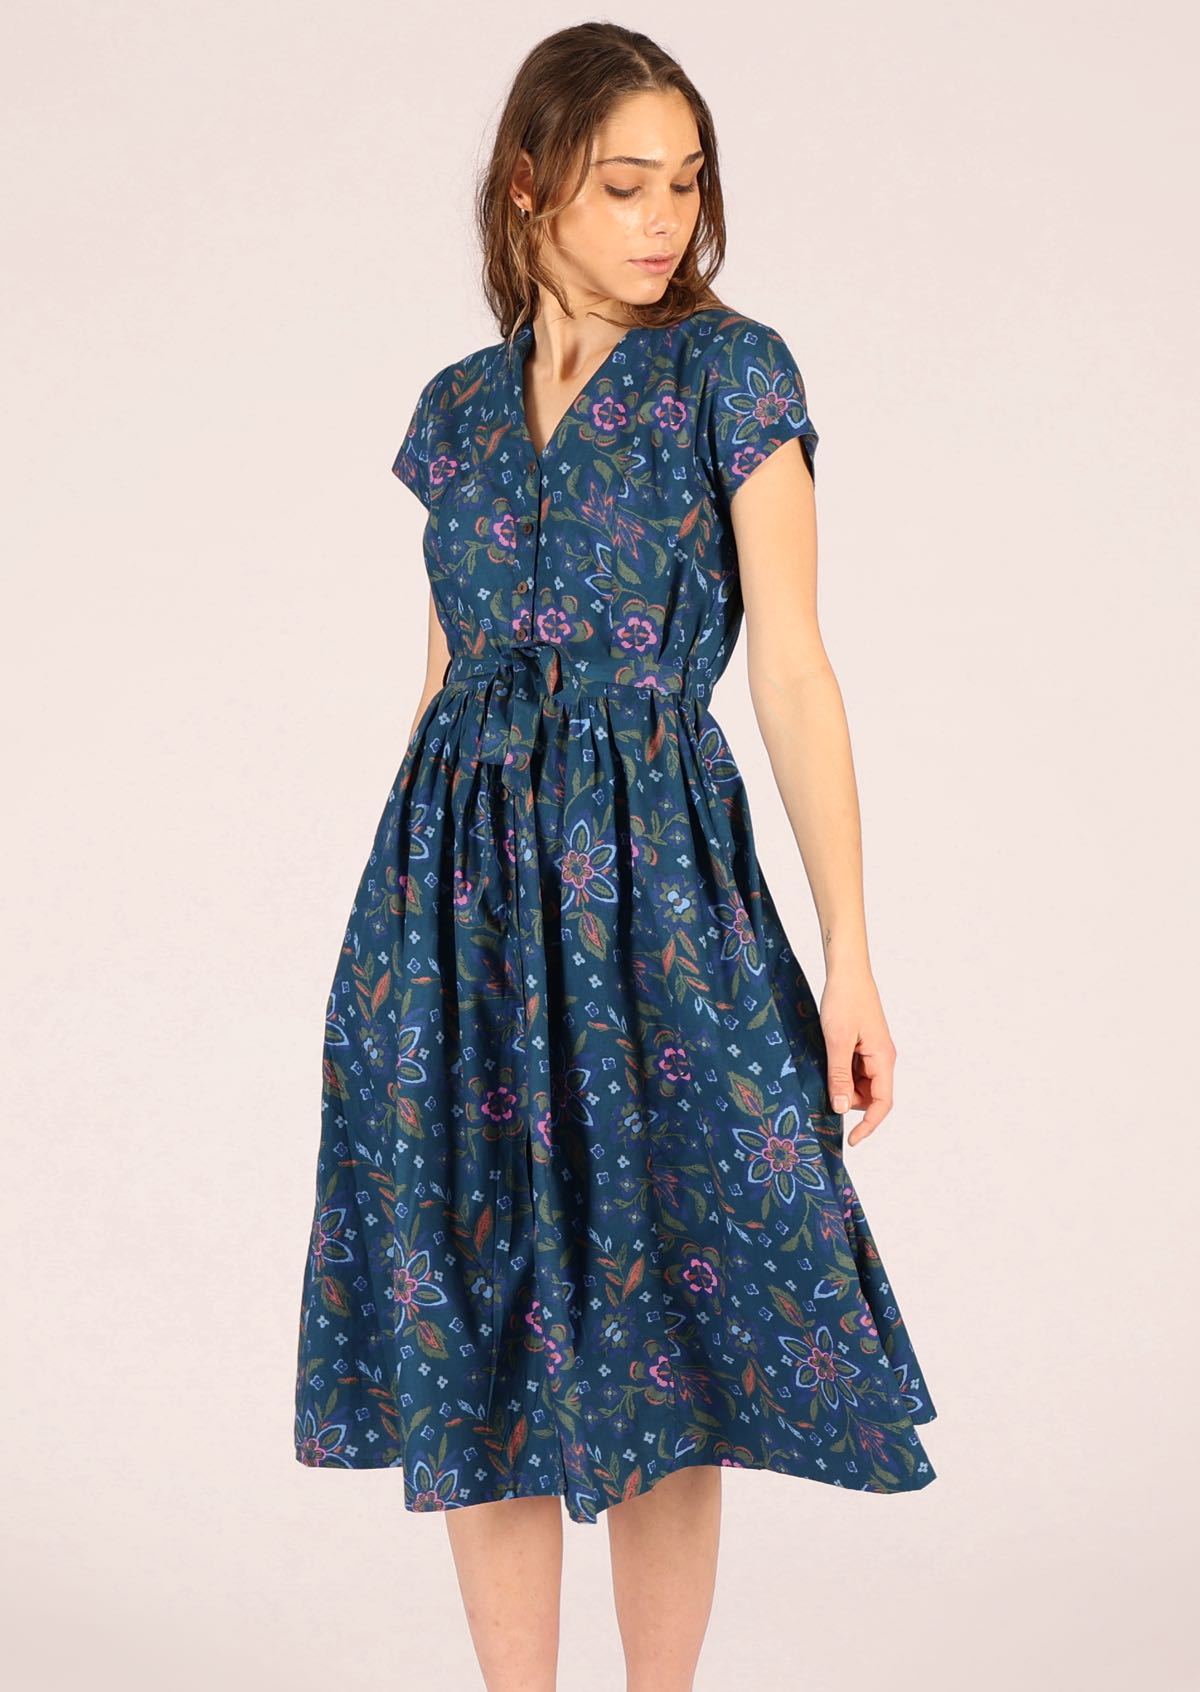 Retro style cotton dress has a mandarin collar which is tucked in to form a V-neck. 